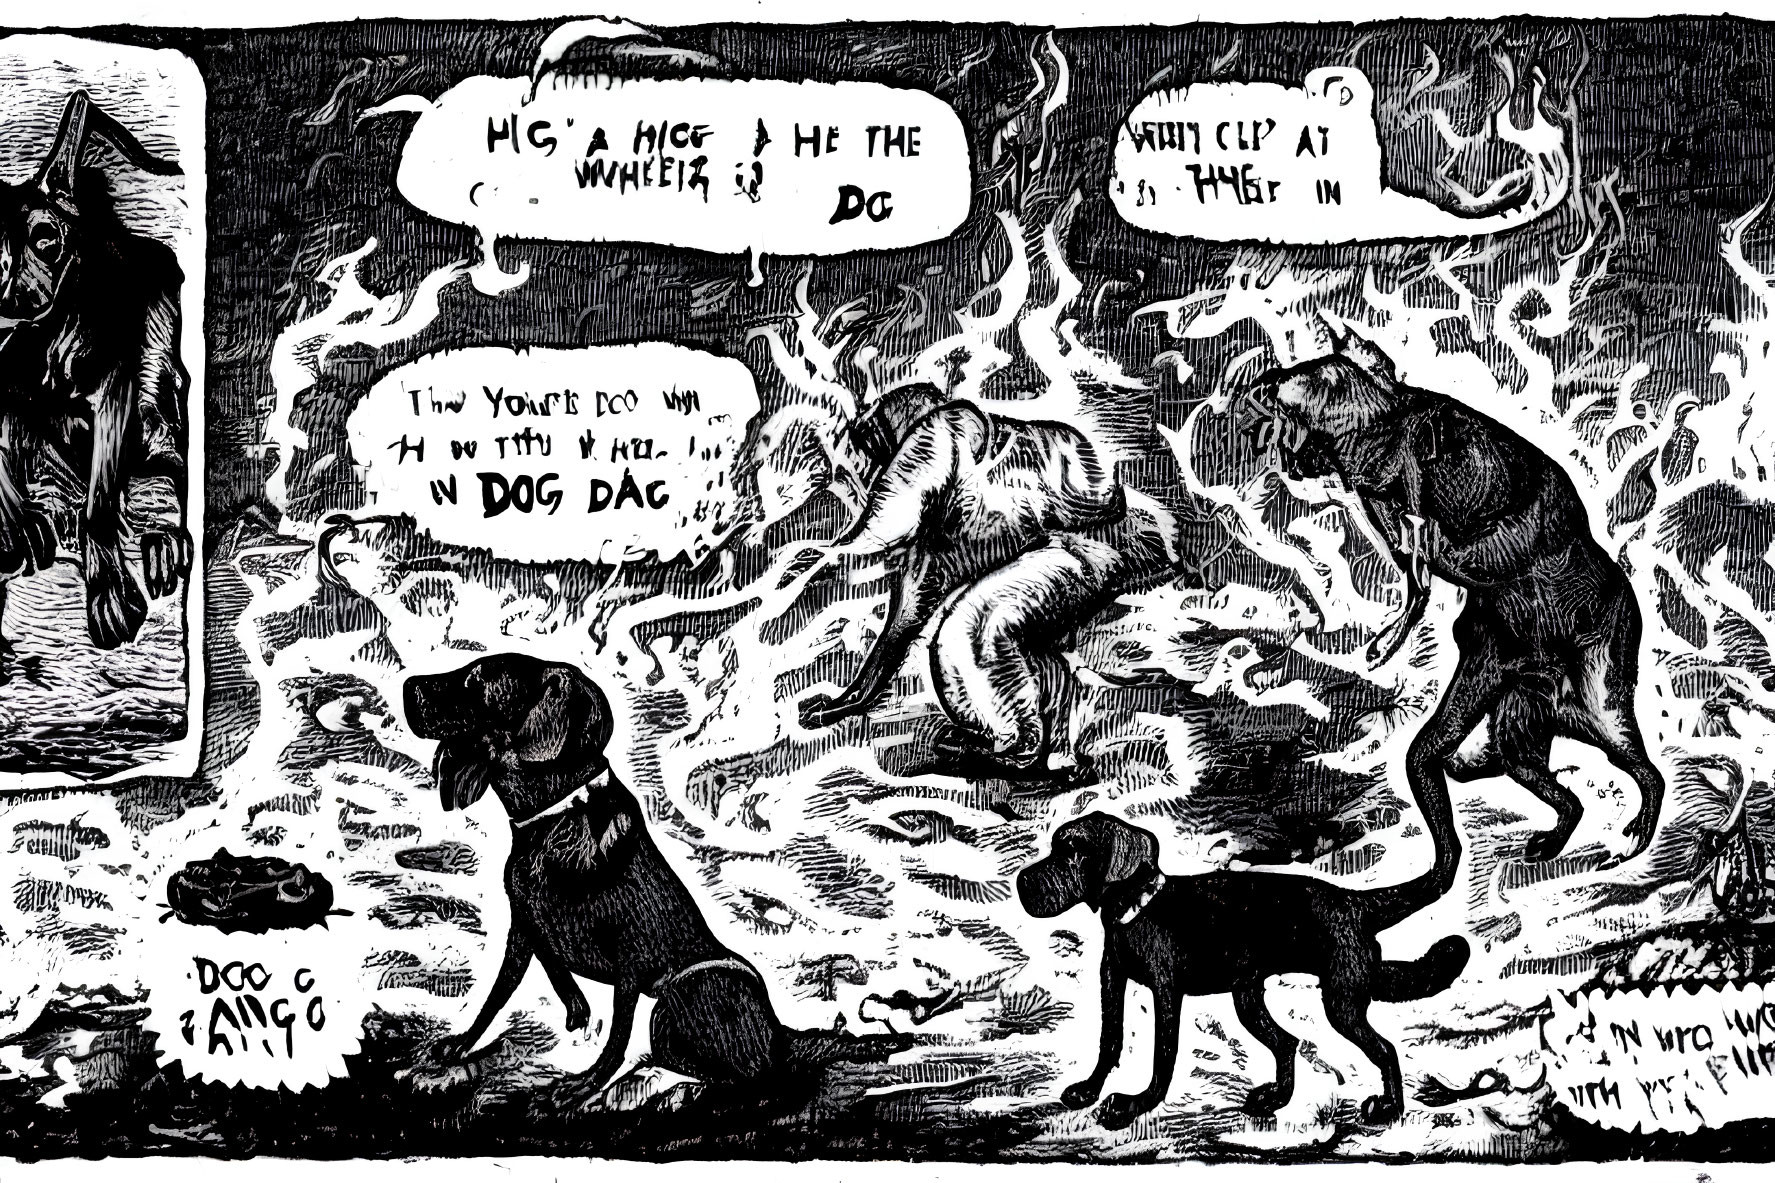 Surreal black and white anthropomorphic dog illustration in smoky setting